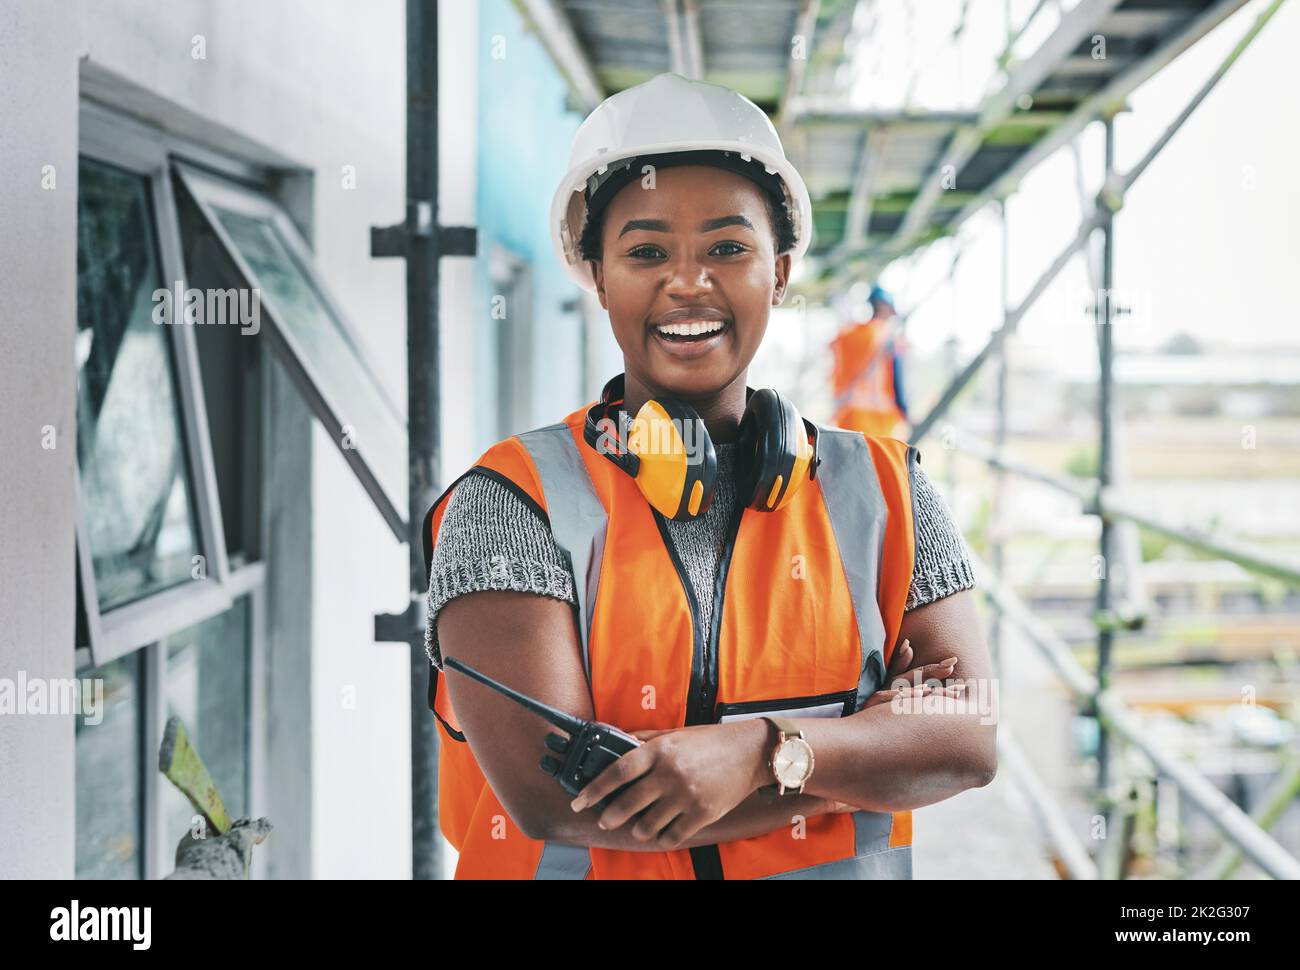 Youll want to invest in this new development. Portrait of a young woman working at a construction site. Stock Photo